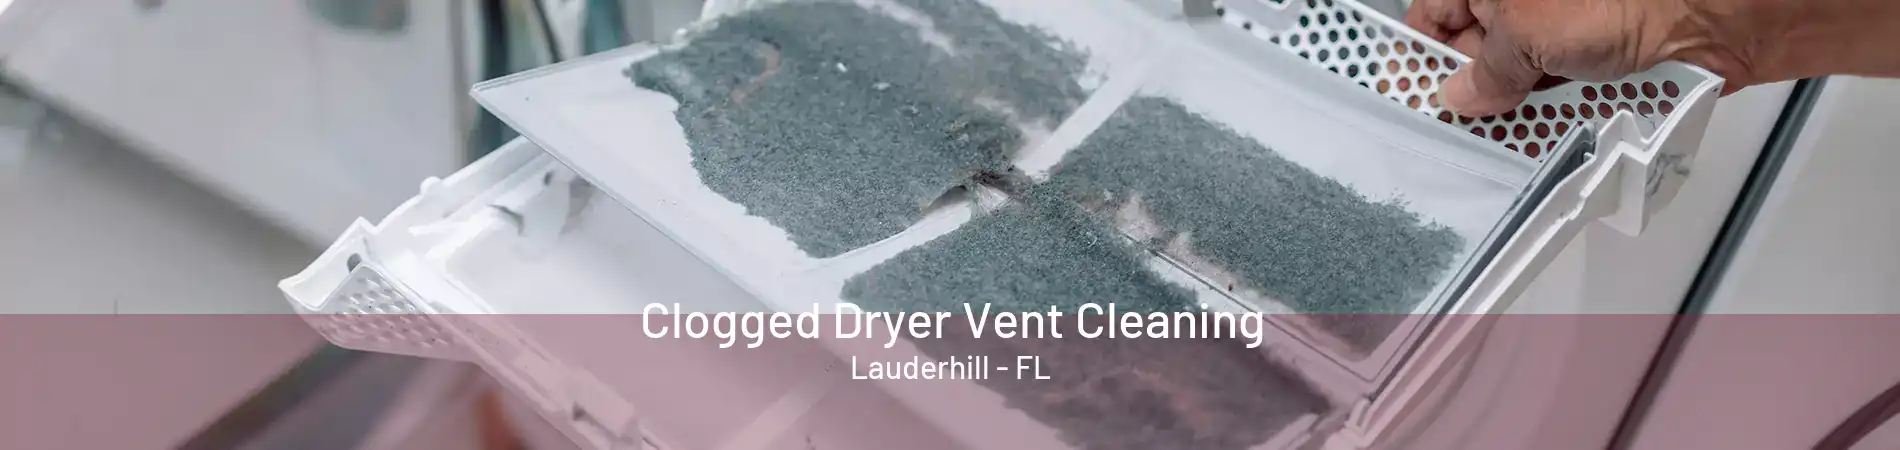 Clogged Dryer Vent Cleaning Lauderhill - FL